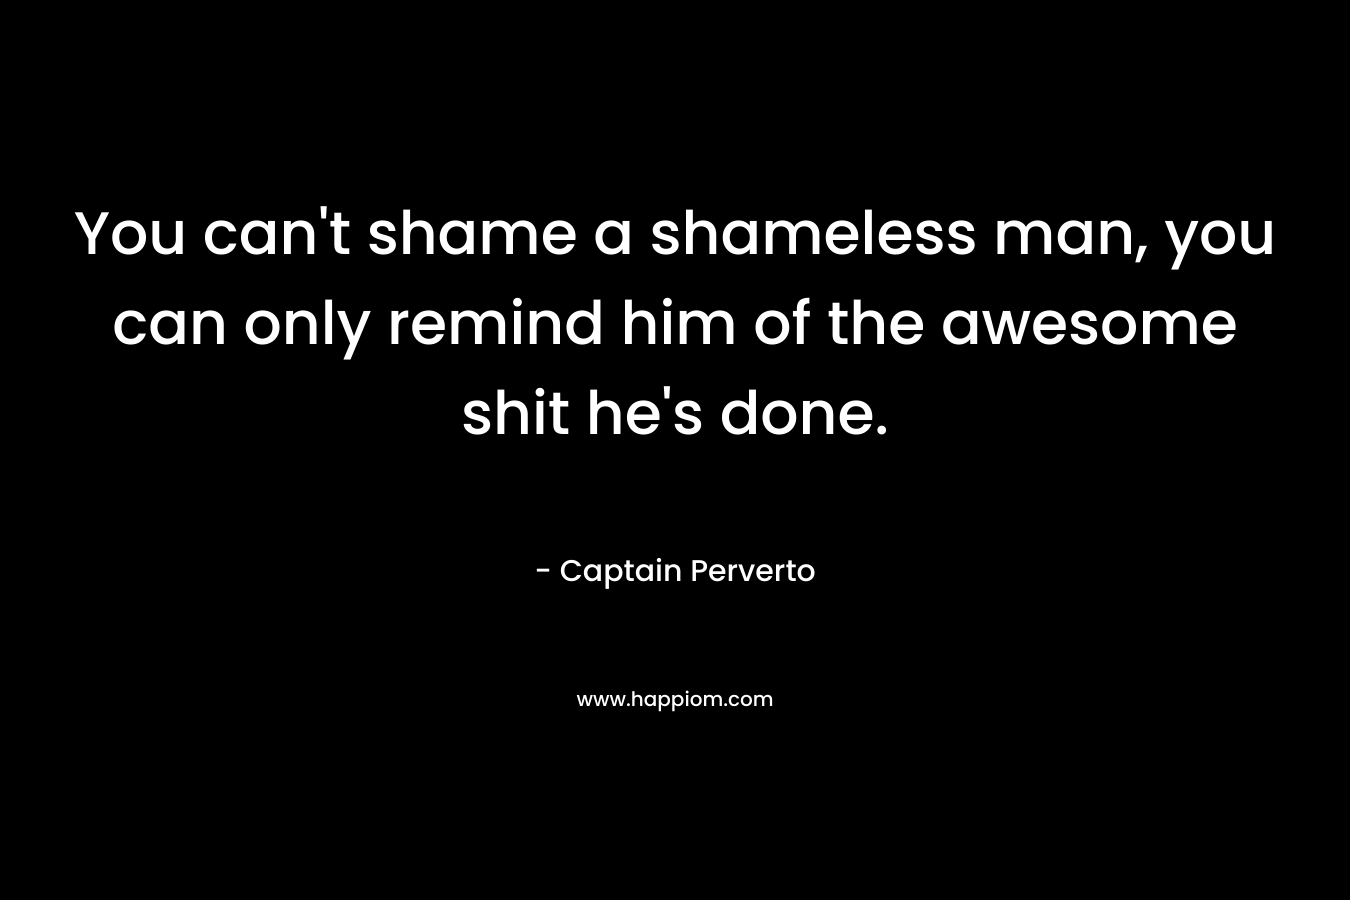 You can’t shame a shameless man, you can only remind him of the awesome shit he’s done. – Captain Perverto